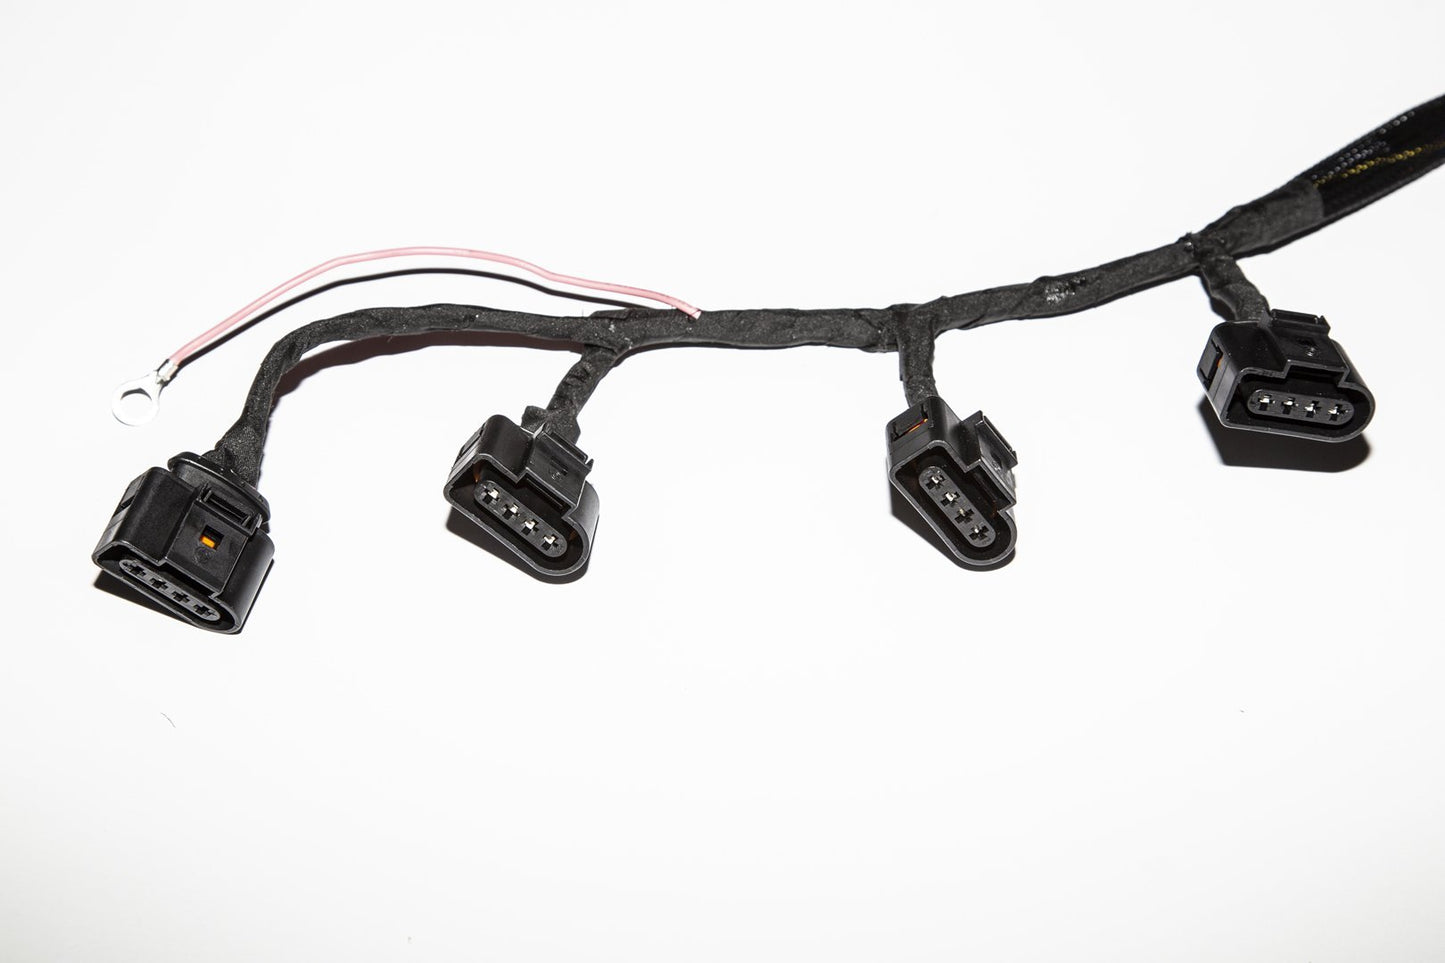 1.8T Ignition Coil Pack Replacement Harness V3 - 1J0 971 658 L -